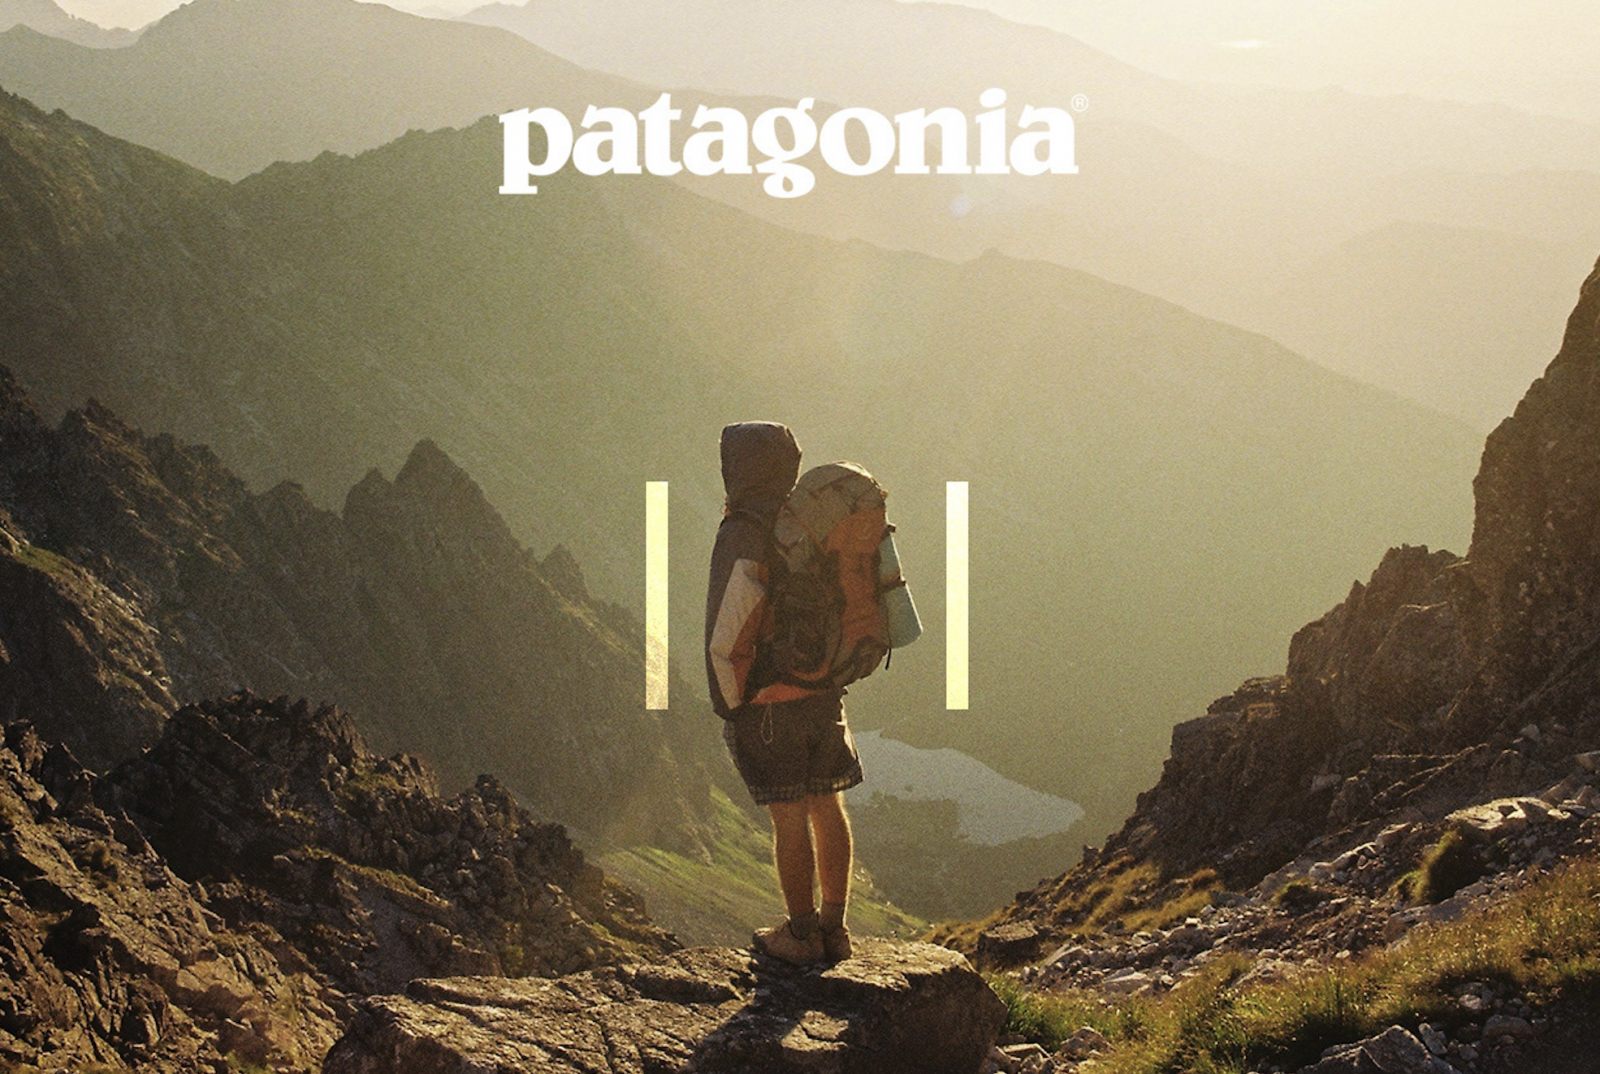 A Patagonia ad campaign